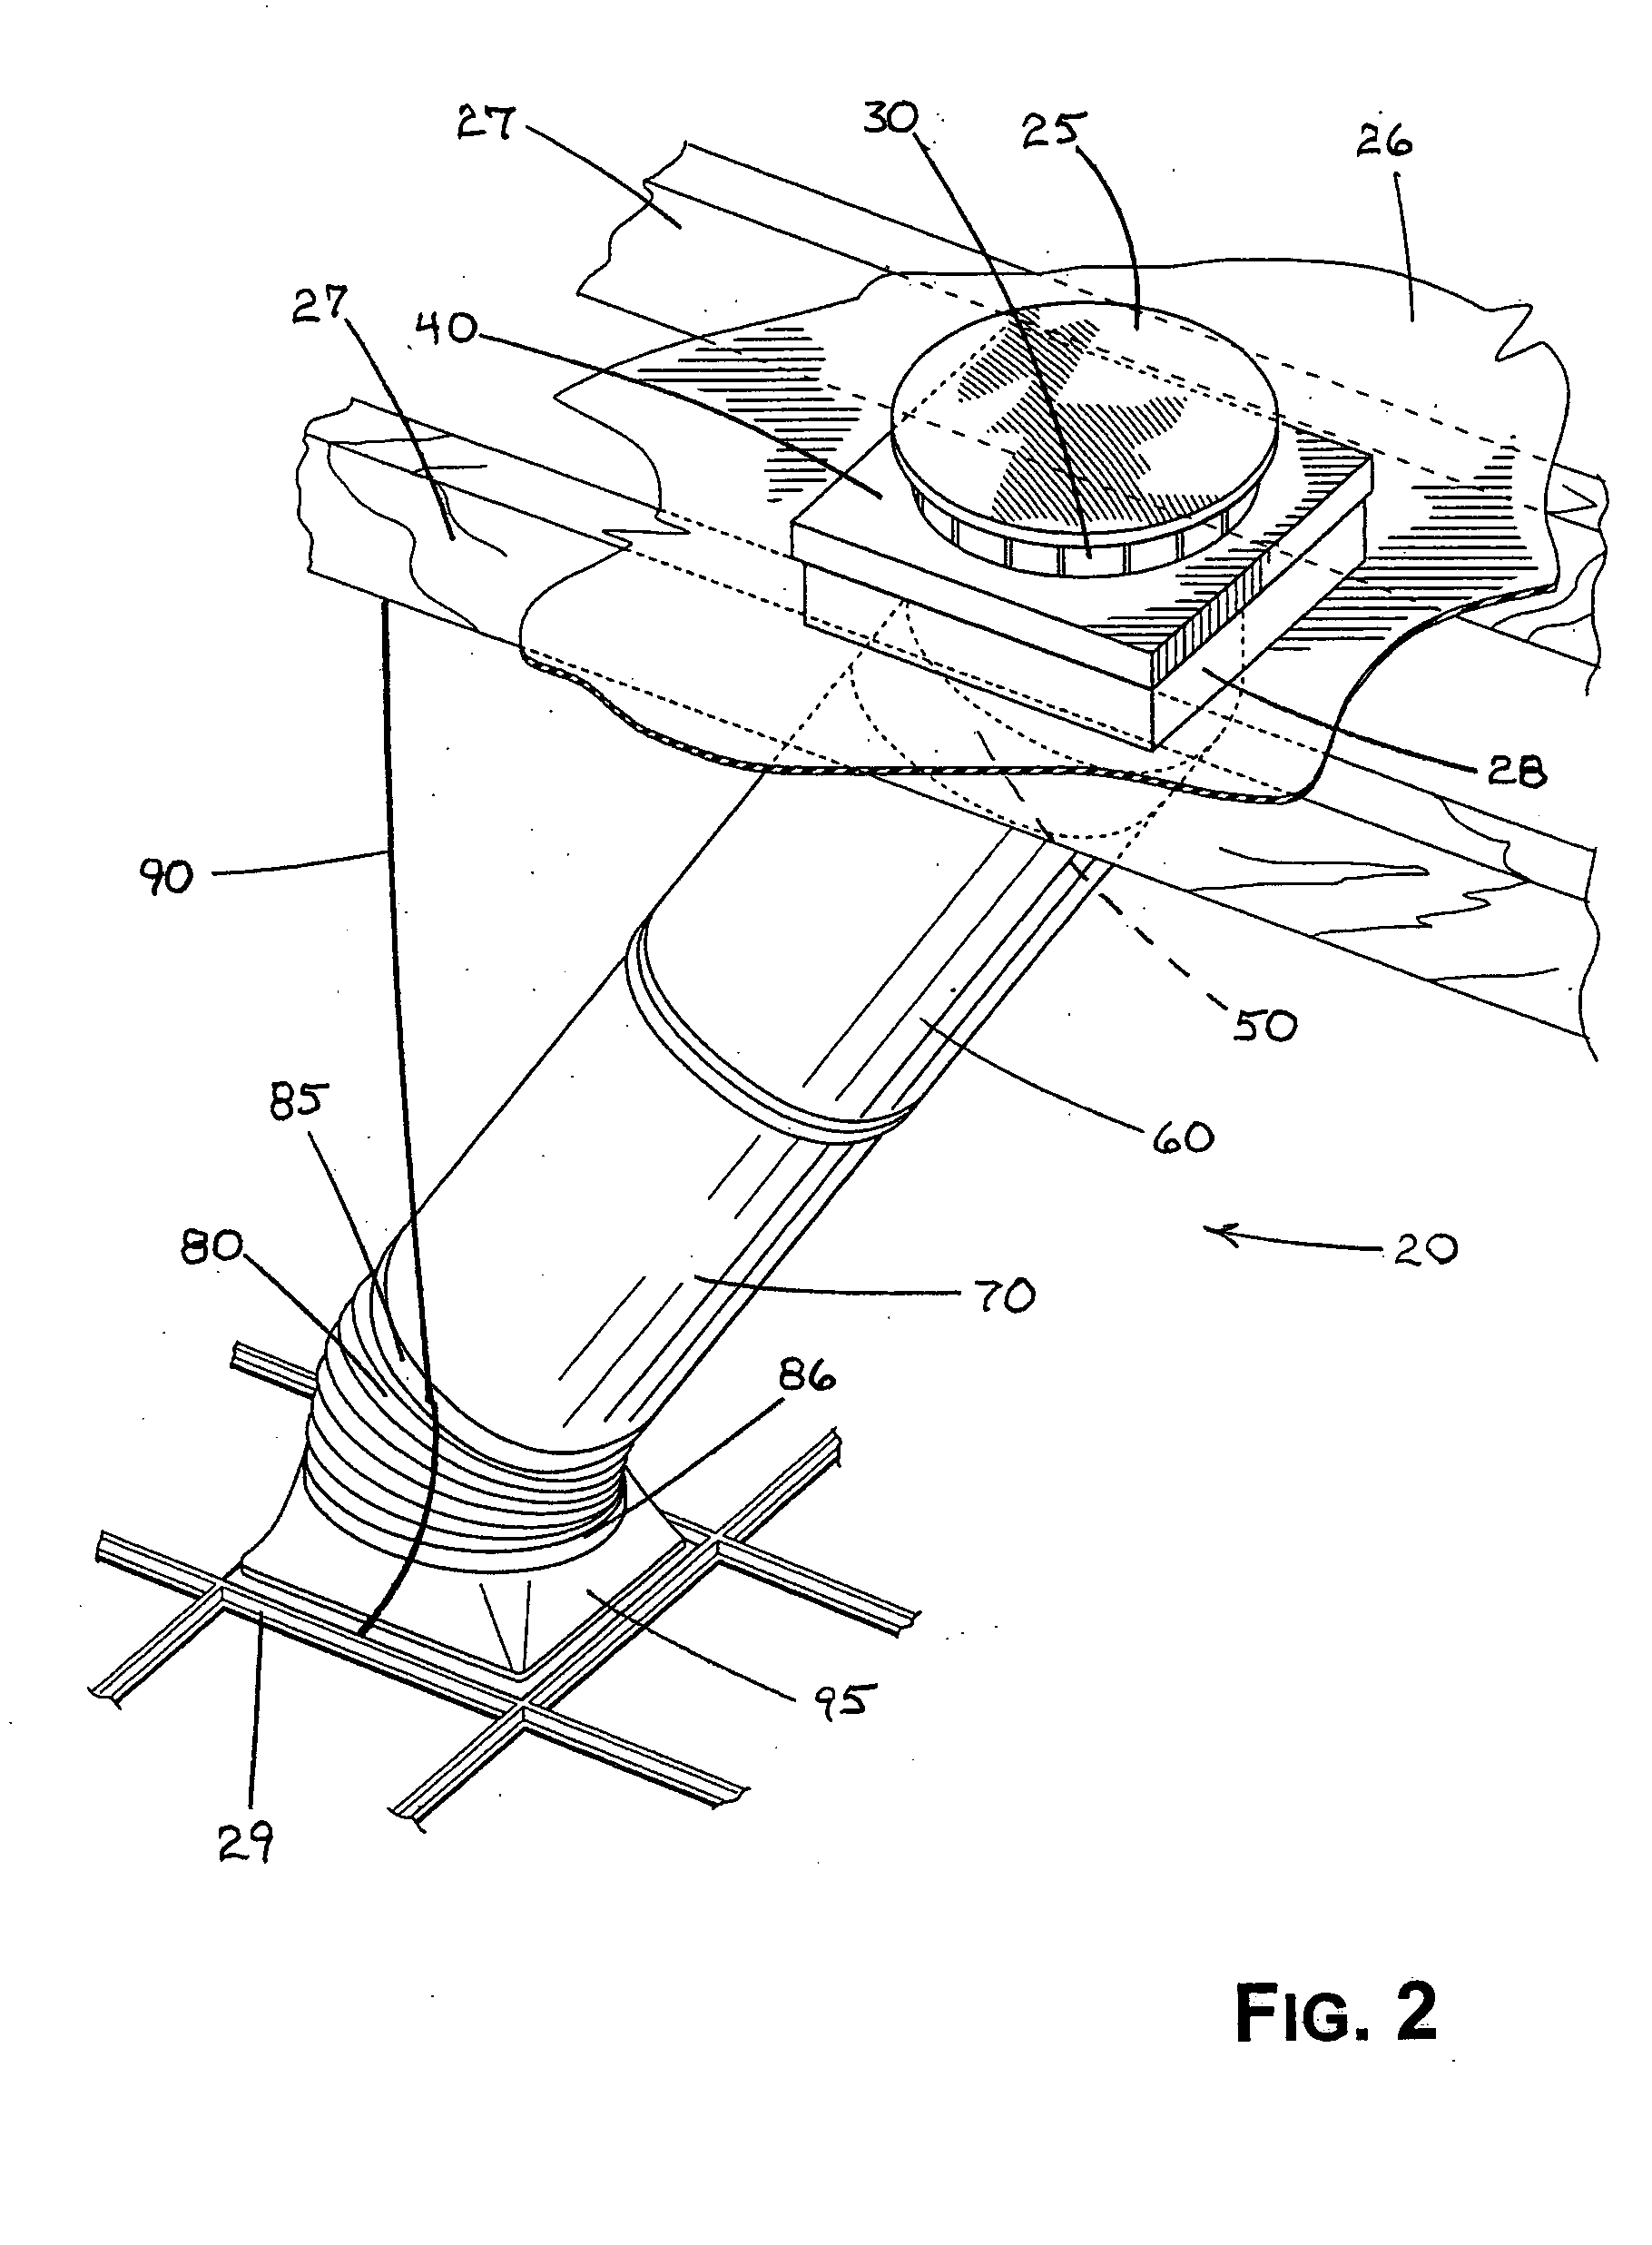 Skylight with displacement absorber and interlocking telescoping tubes